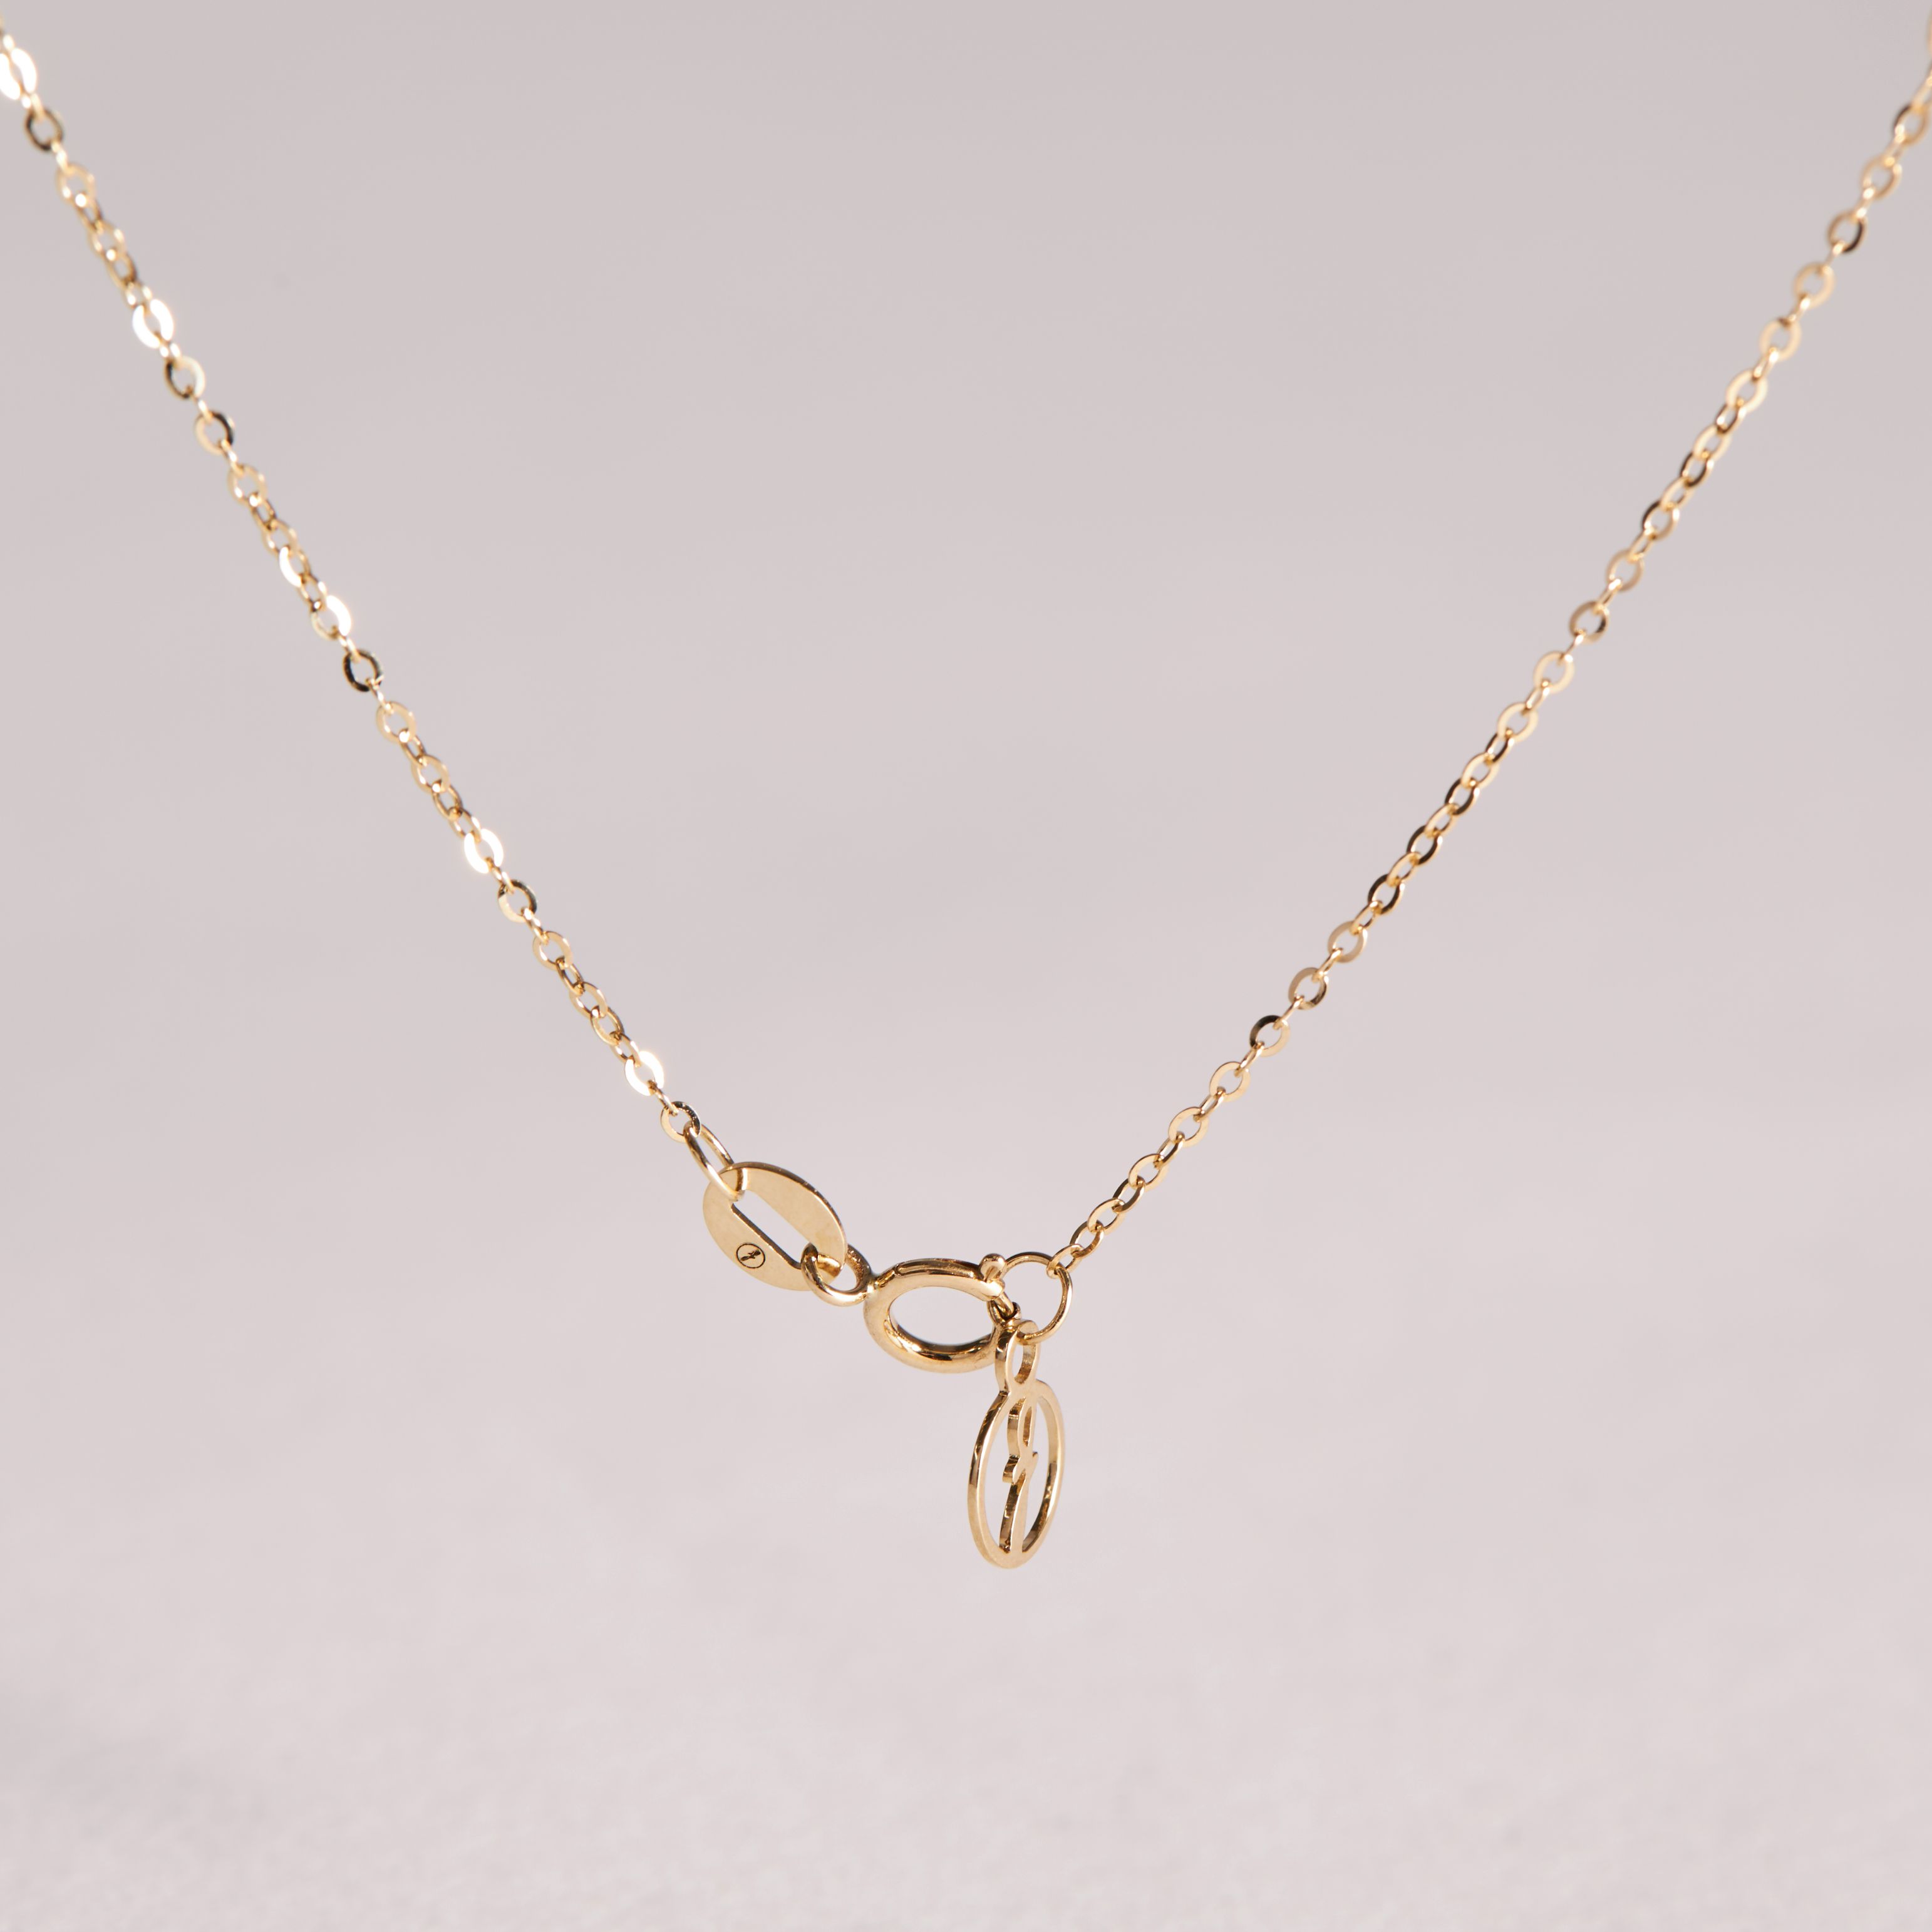 LYON REAL GOLD CHAIN NECKLACE